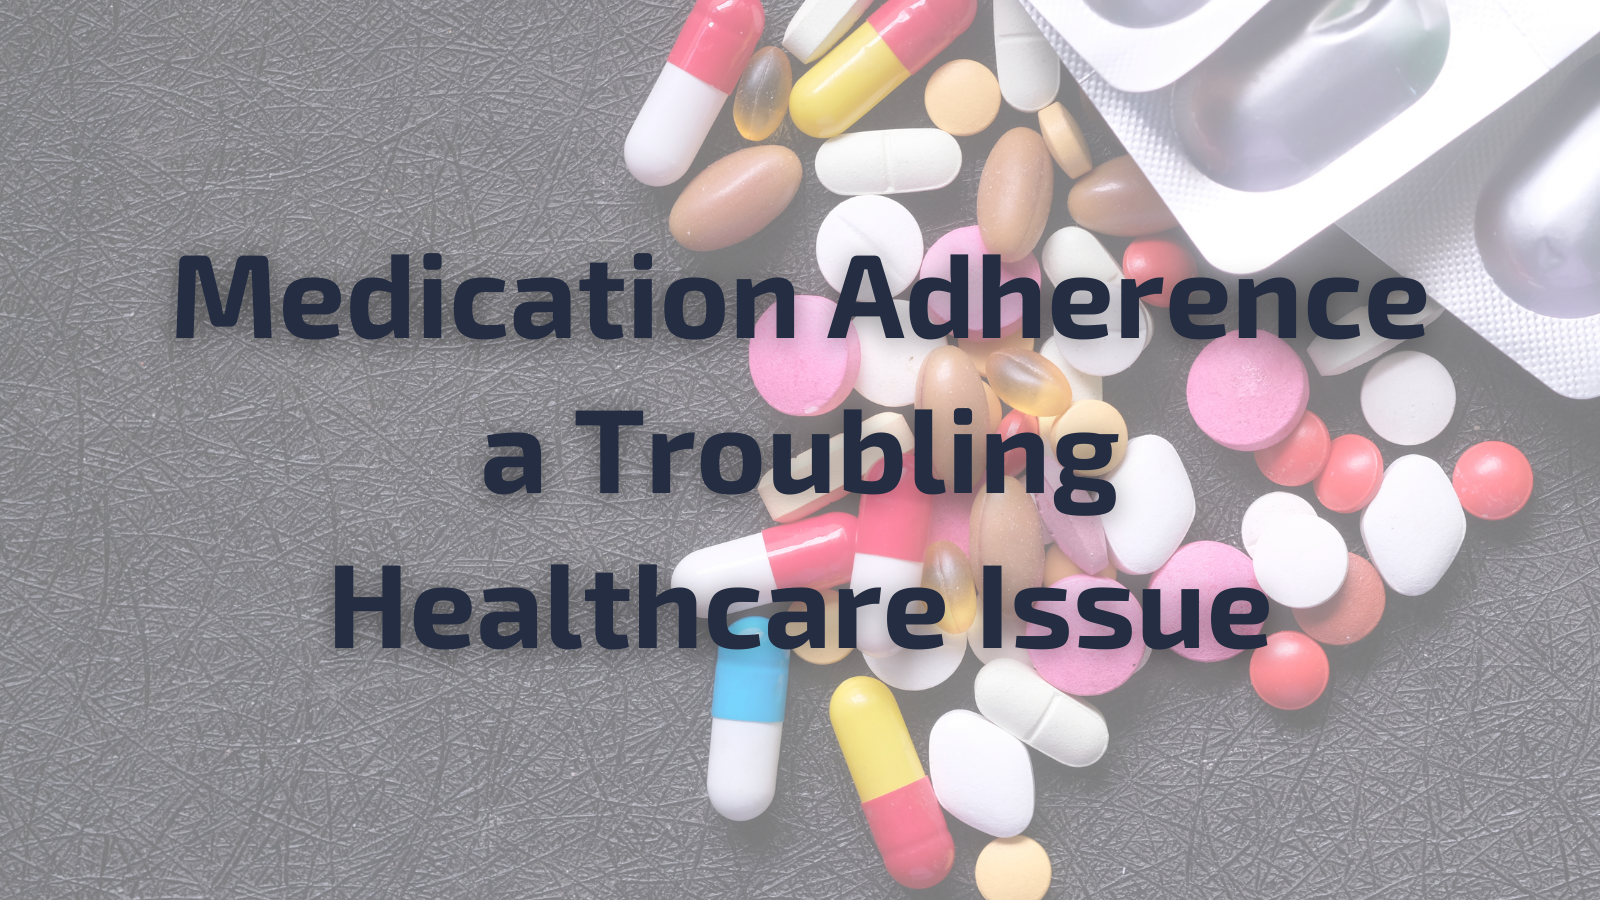 Medication Adherence a Troubling Healthcare Issue